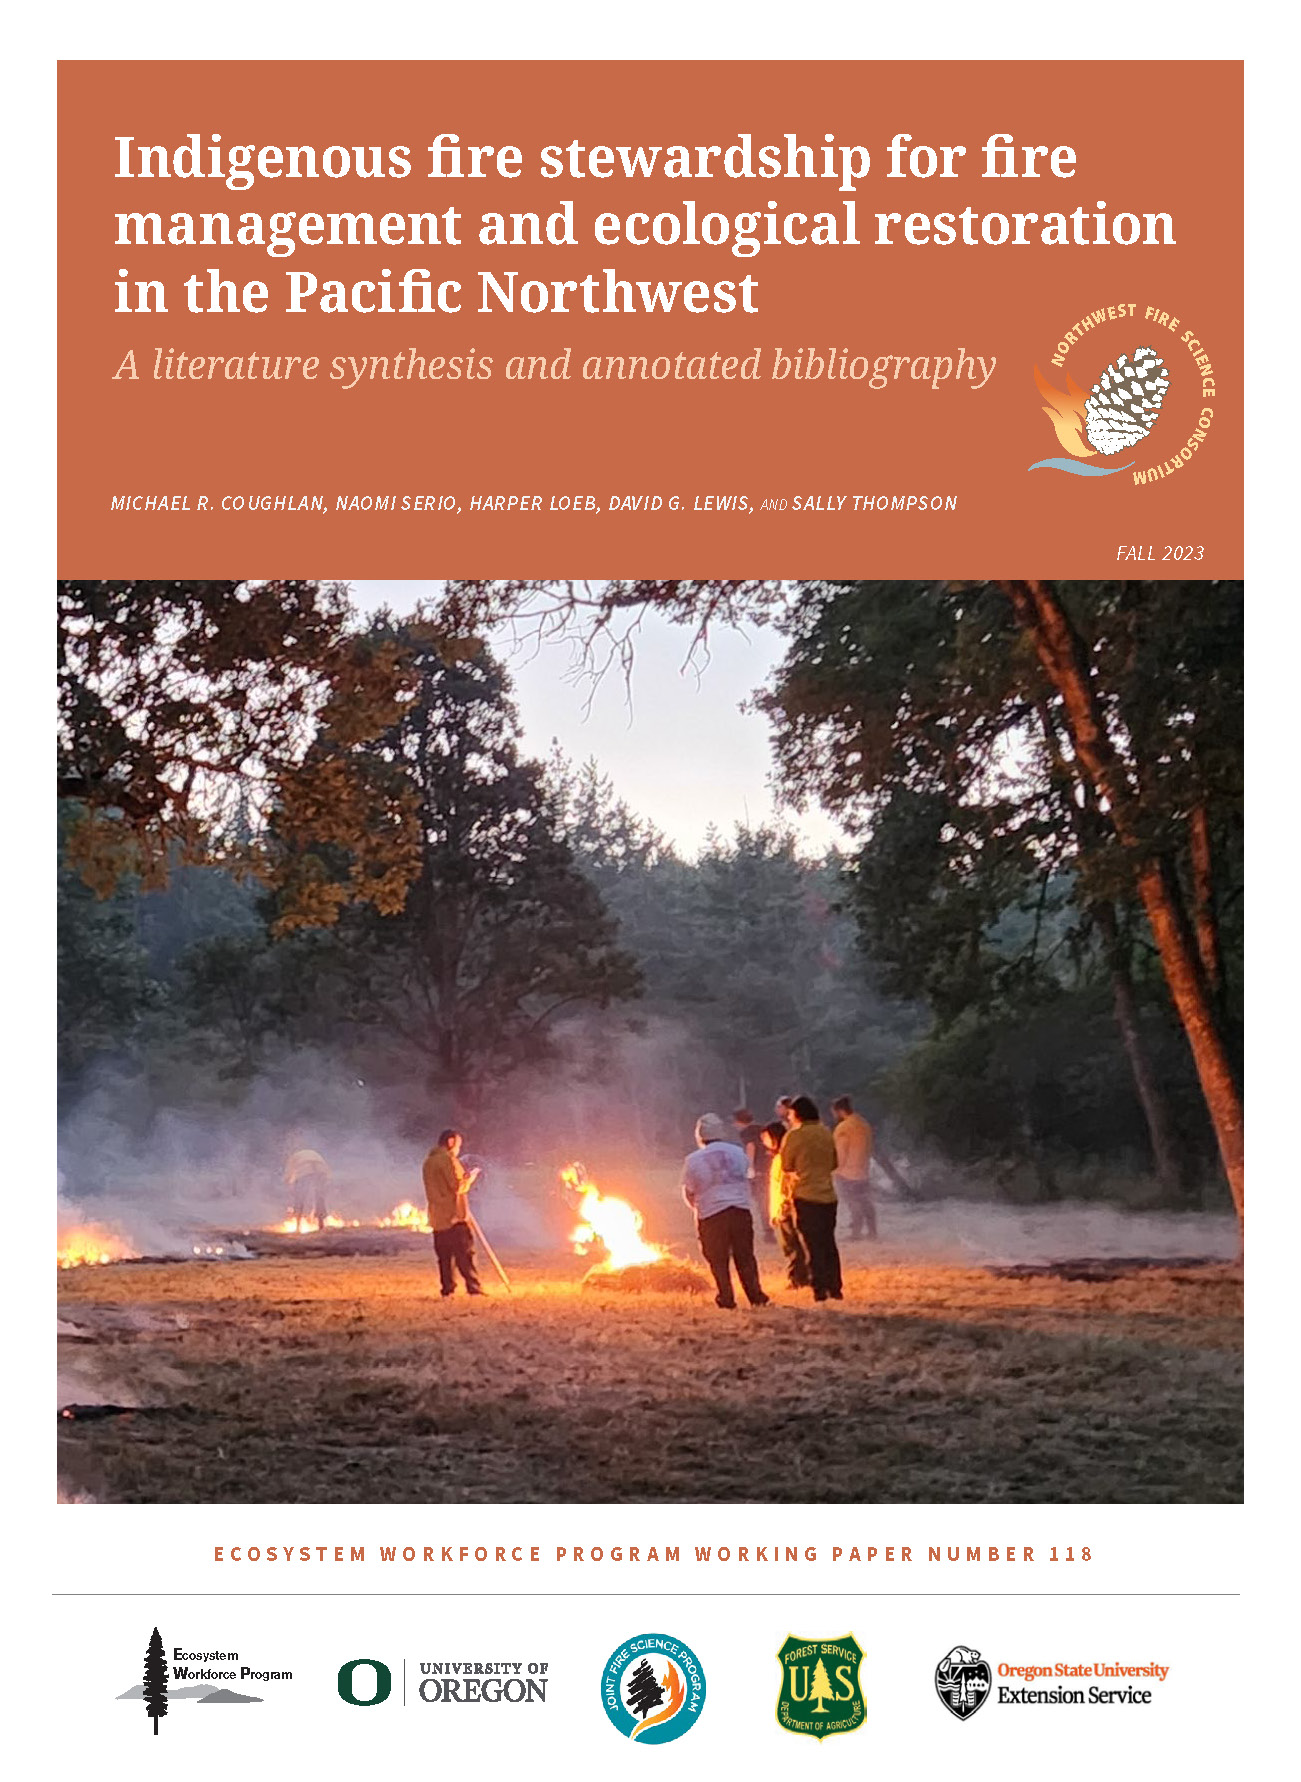 Image of cover of synthesis on Indigenous fire stewardship